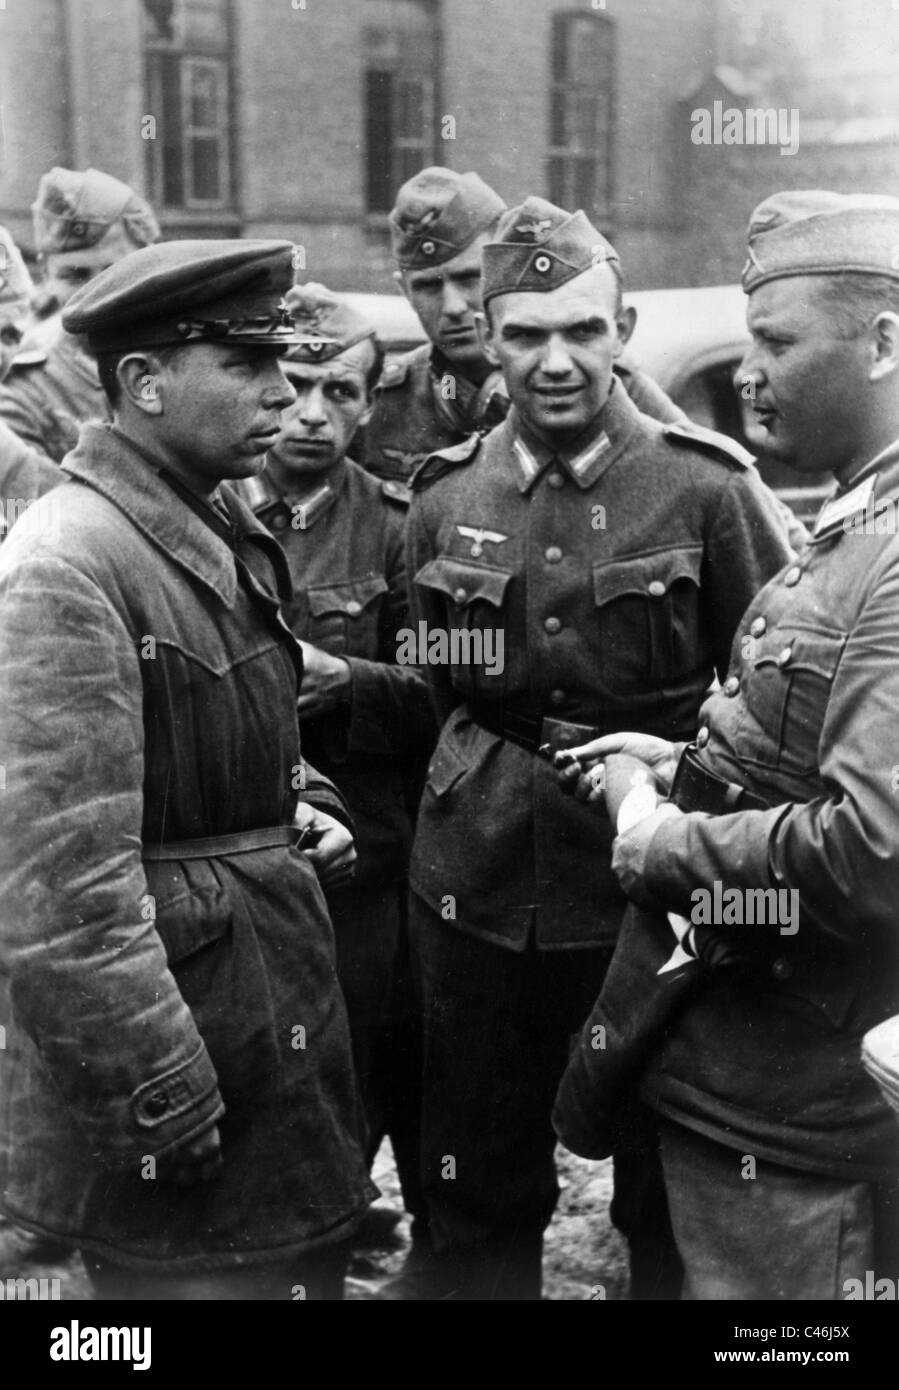 Second World War, Russian Prisoners of War being interrogated by German soldiers Stock Photo